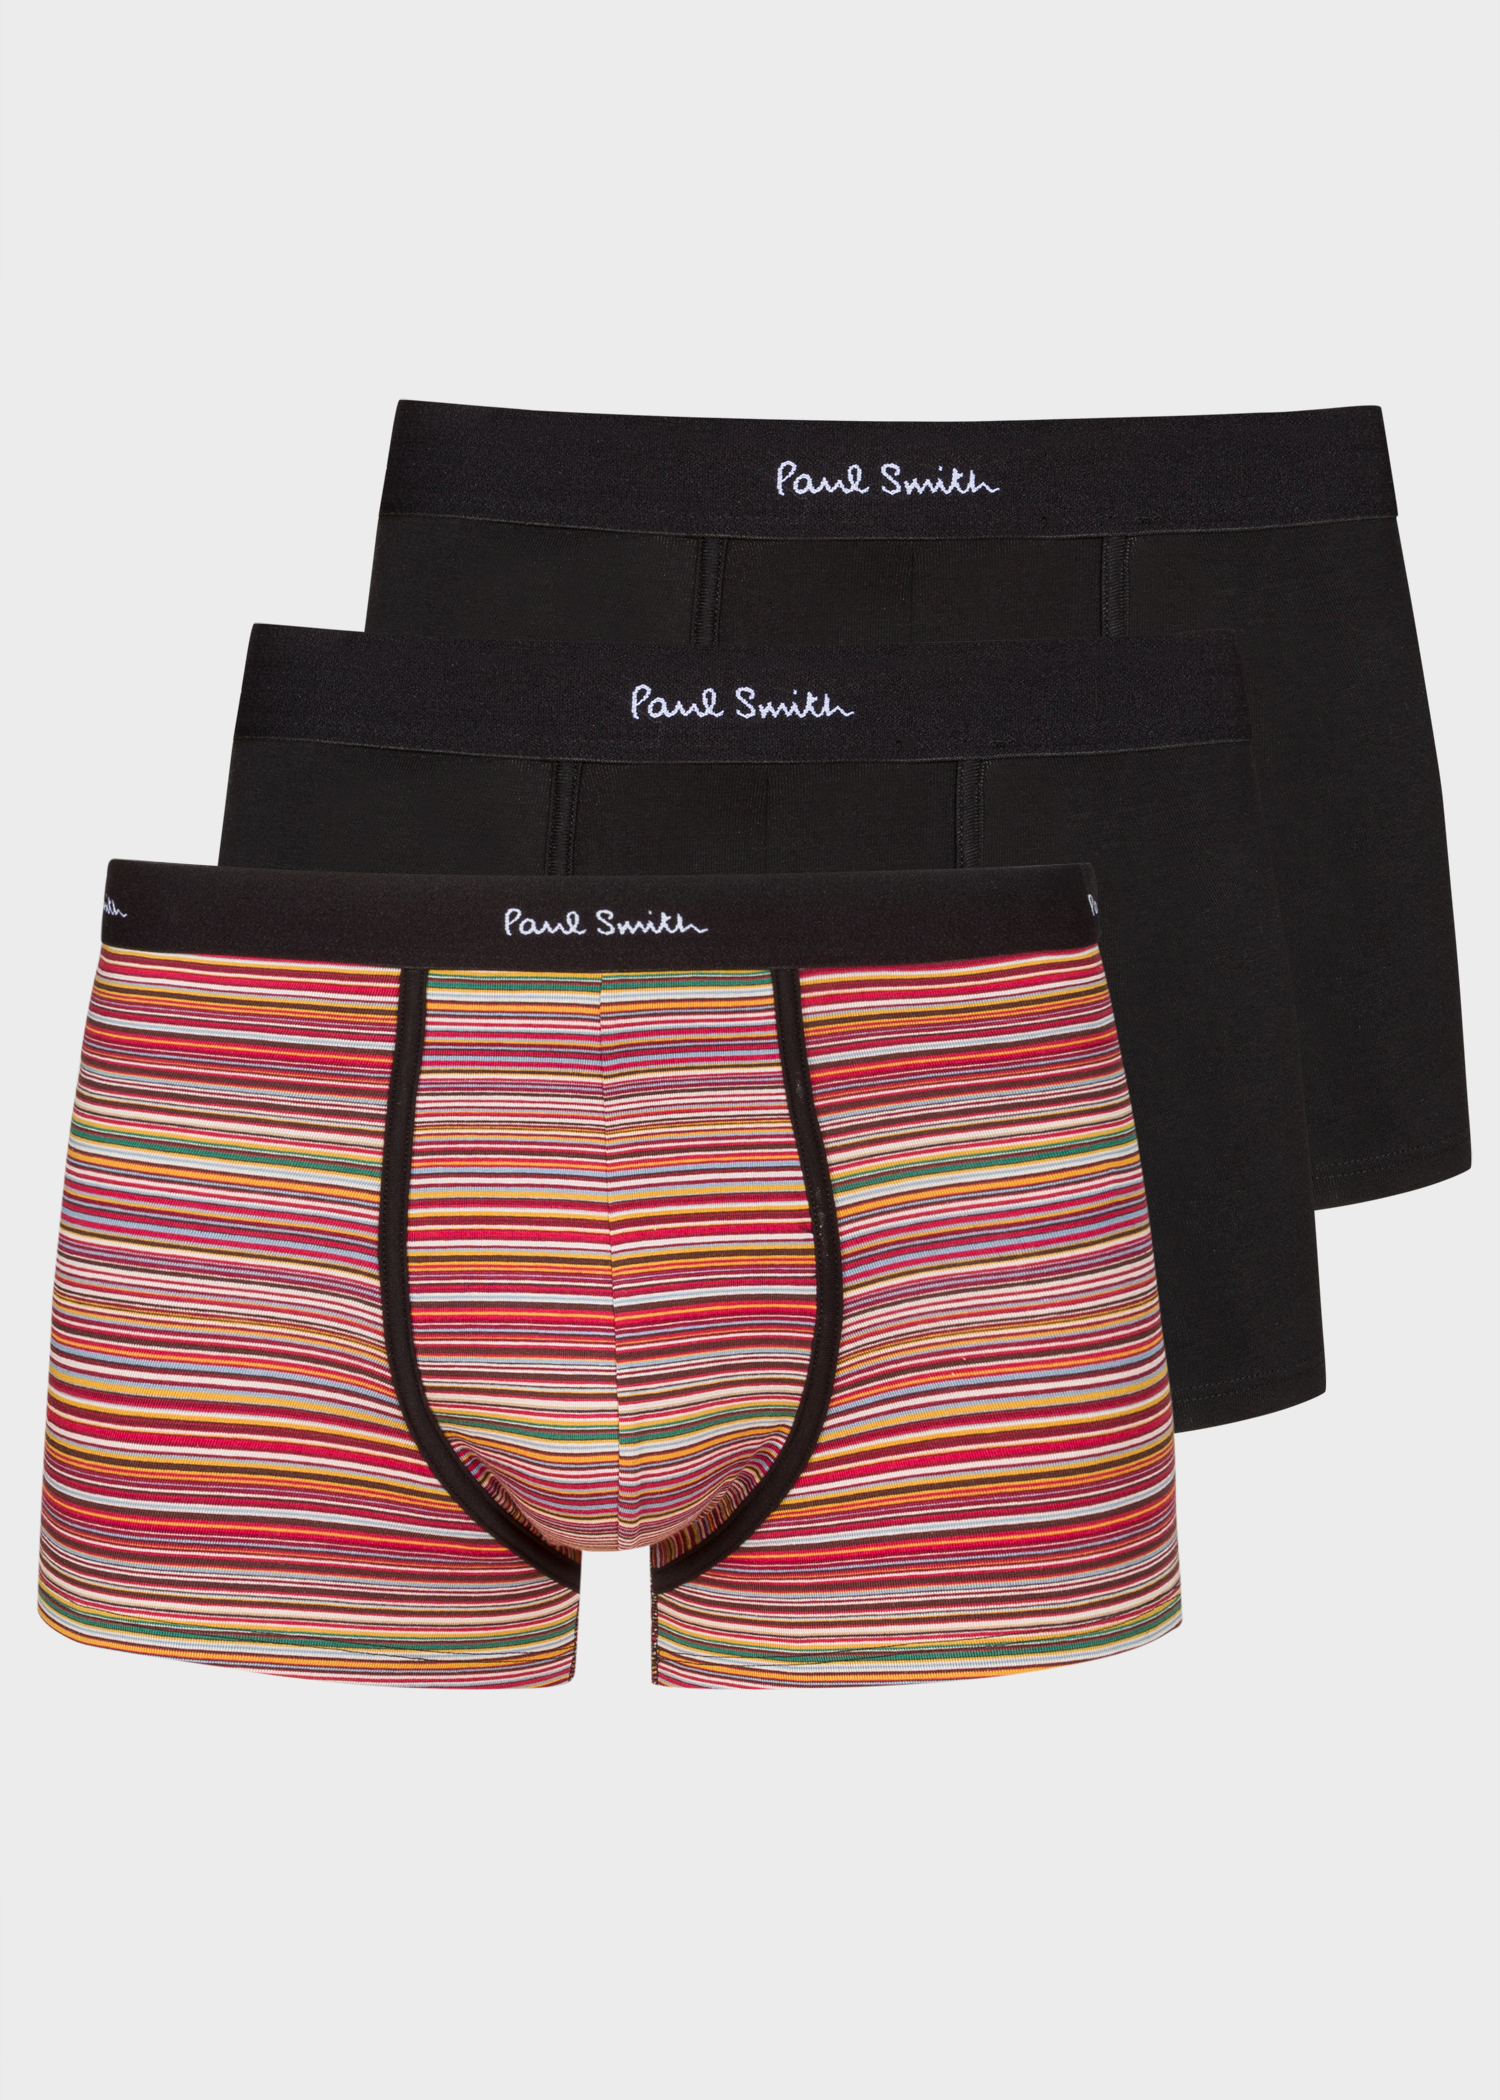 Front view - Men's Black Mixed Stripe Boxer Briefs Three Pack Paul Smith